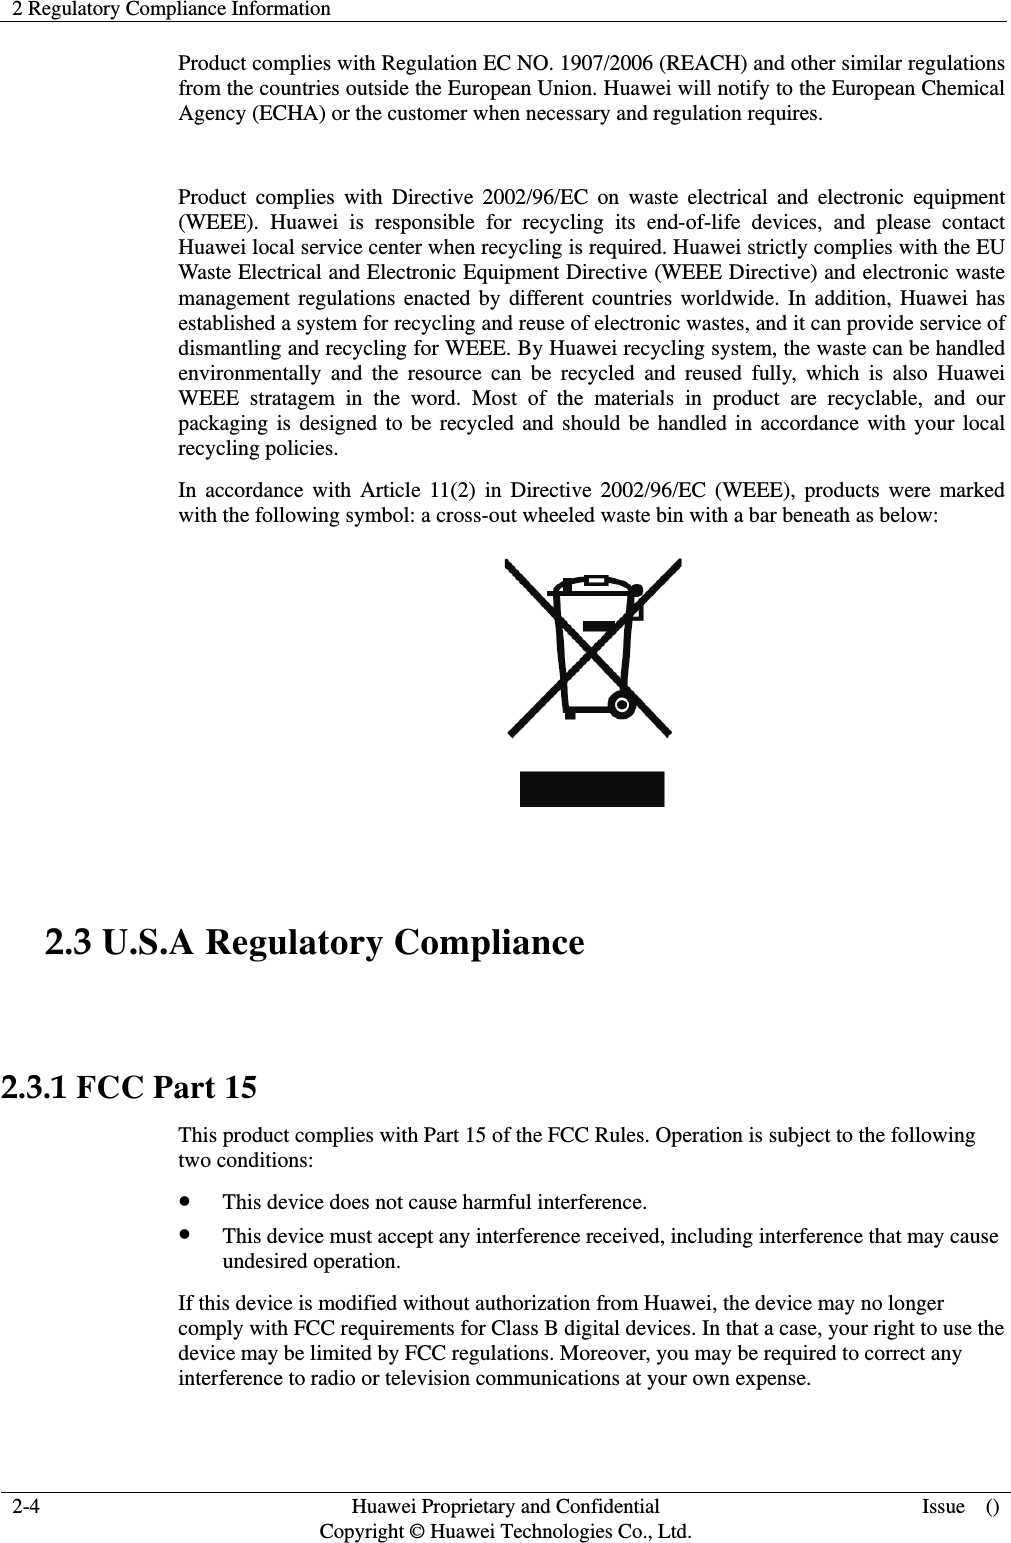 2 Regulatory Compliance Information  2-4  Huawei Proprietary and Confidential         Copyright © Huawei Technologies Co., Ltd. Issue  () Product complies with Regulation EC NO. 1907/2006 (REACH) and other similar regulations from the countries outside the European Union. Huawei will notify to the European Chemical Agency (ECHA) or the customer when necessary and regulation requires.  Product complies with Directive 2002/96/EC on waste electrical and electronic equipment (WEEE). Huawei is responsible for recycling its end-of-life devices, and please contact Huawei local service center when recycling is required. Huawei strictly complies with the EU Waste Electrical and Electronic Equipment Directive (WEEE Directive) and electronic waste management regulations enacted by different countries worldwide. In addition, Huawei has established a system for recycling and reuse of electronic wastes, and it can provide service of dismantling and recycling for WEEE. By Huawei recycling system, the waste can be handled environmentally and the resource can be recycled and reused fully, which is also Huawei WEEE stratagem in the word. Most of the materials in product are recyclable, and our packaging is designed to be recycled and should be handled in accordance with your local recycling policies.   In accordance with Article 11(2) in Directive 2002/96/EC (WEEE), products were marked with the following symbol: a cross-out wheeled waste bin with a bar beneath as below:   2.3 U.S.A Regulatory Compliance  2.3.1 FCC Part 15 This product complies with Part 15 of the FCC Rules. Operation is subject to the following two conditions: z This device does not cause harmful interference. z This device must accept any interference received, including interference that may cause undesired operation. If this device is modified without authorization from Huawei, the device may no longer comply with FCC requirements for Class B digital devices. In that a case, your right to use the device may be limited by FCC regulations. Moreover, you may be required to correct any interference to radio or television communications at your own expense. 